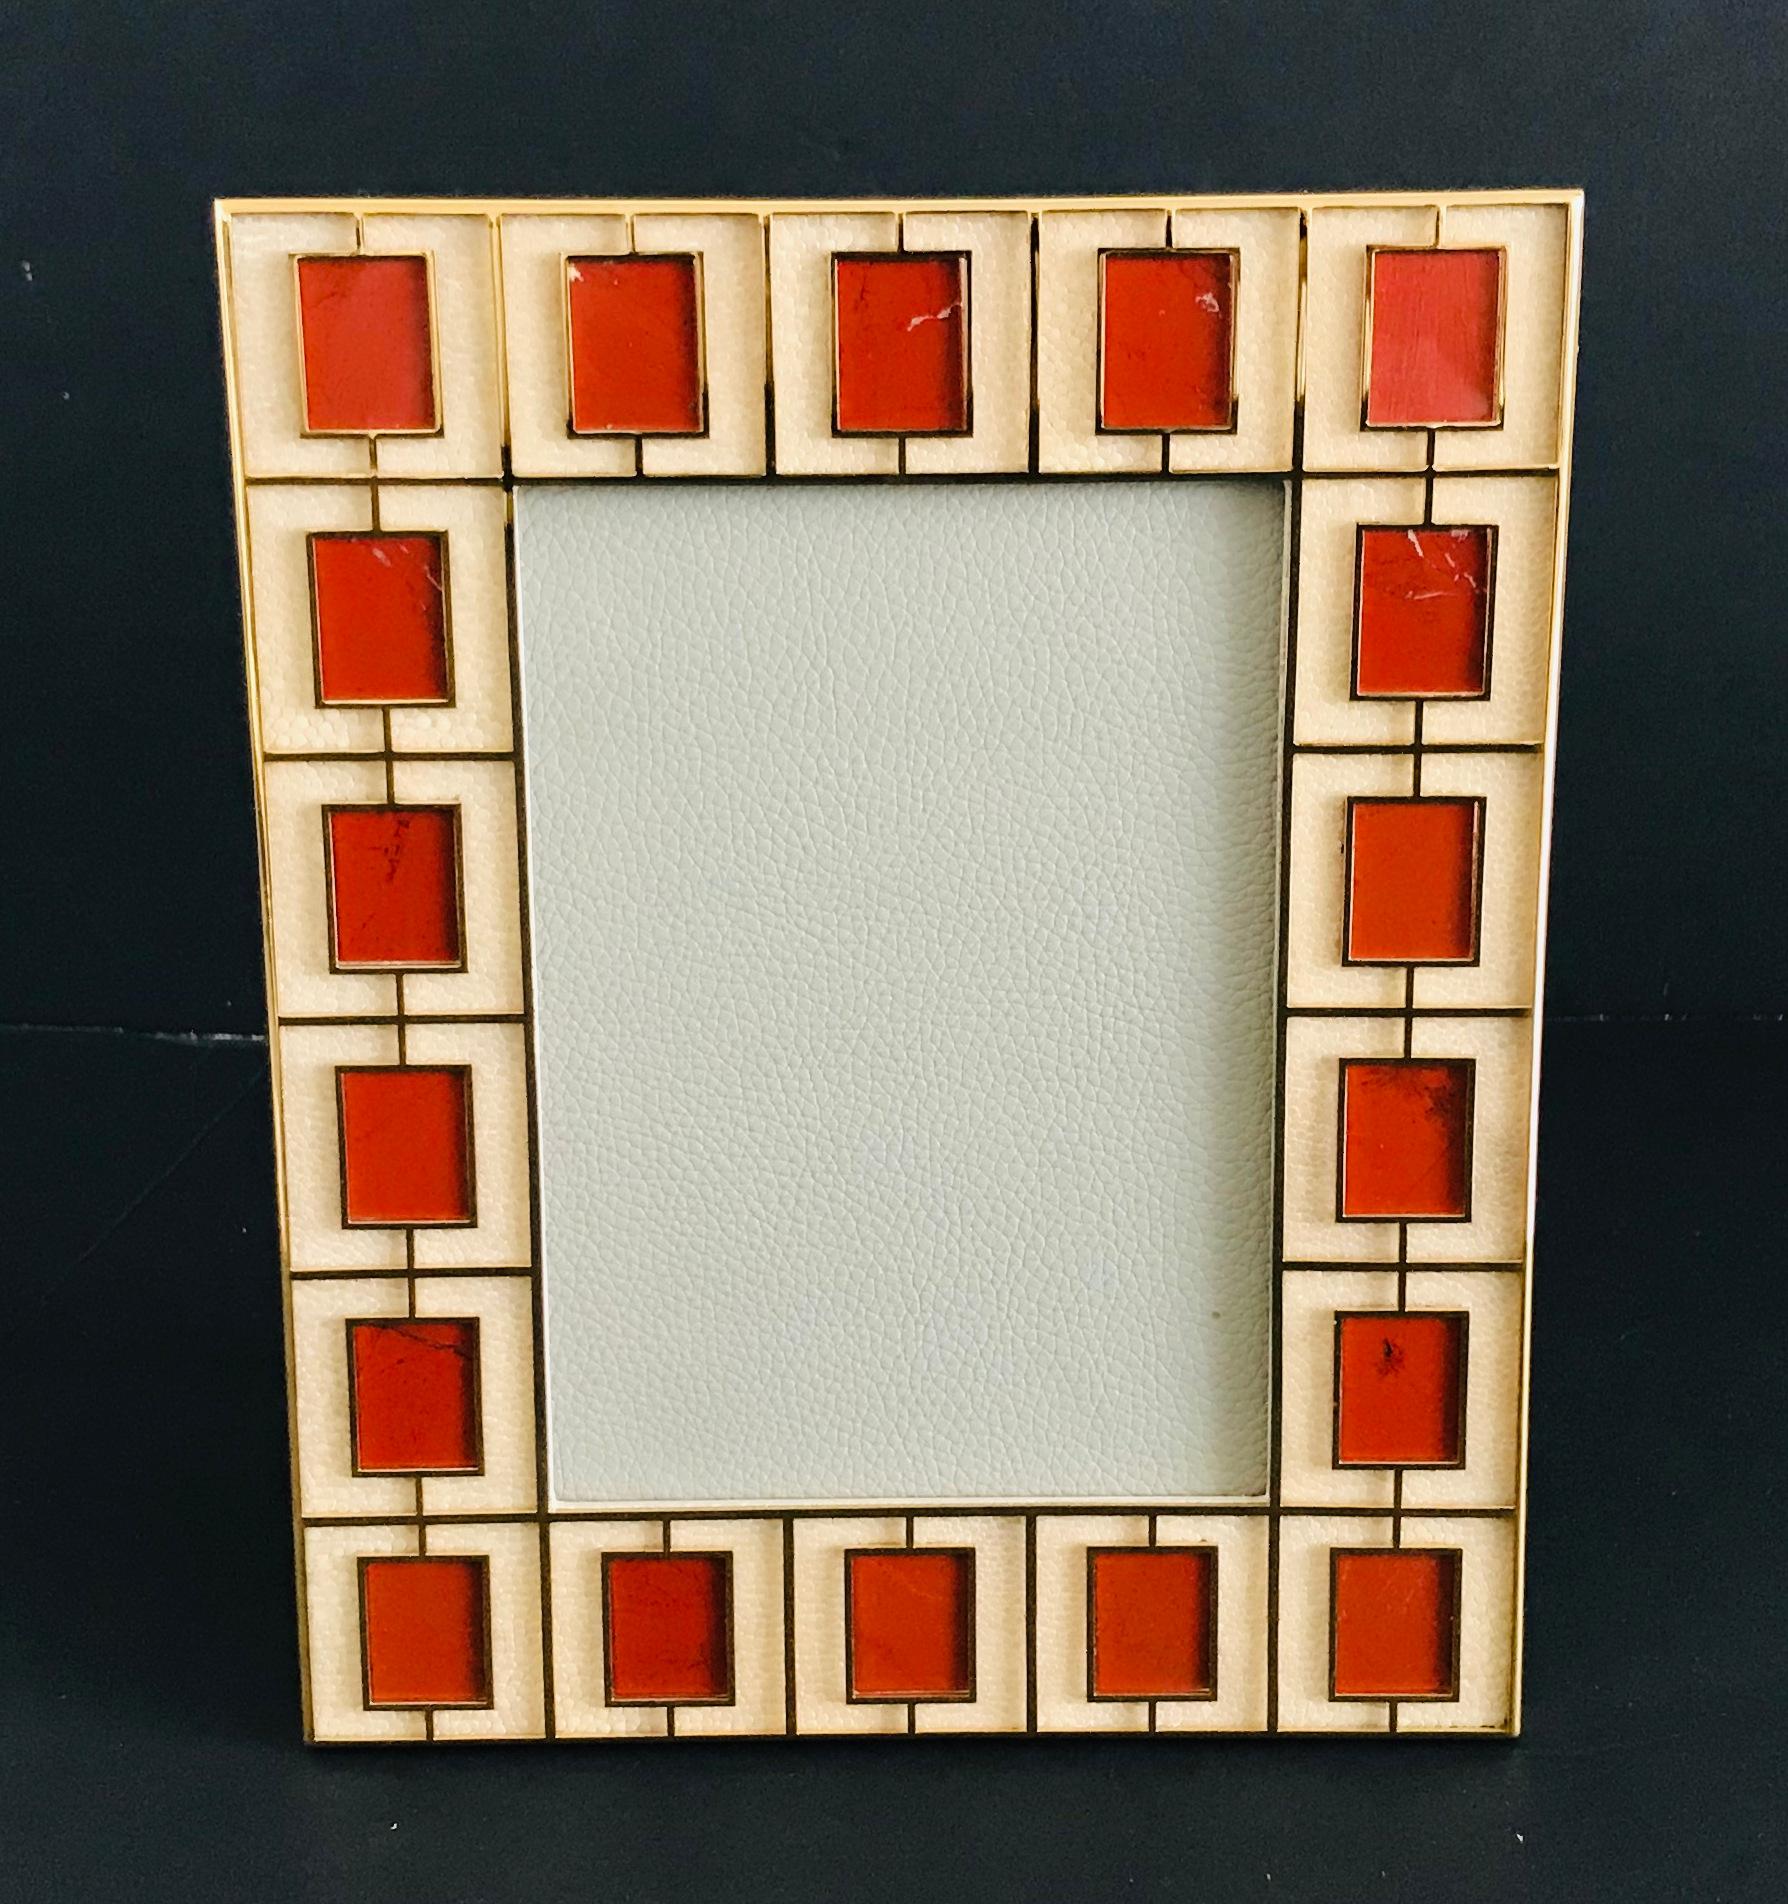 Ivory shagreen leather with red jasper stones and gold-plated picture frame by Fabio Ltd
Height: 10.5 inches / Width: 8.5 inches / Depth: 1 inch
Photo size: 5 inches by 7 inches
LAST 1 in stock in Los Angeles
Order Reference #: FABIOLTD PF34
This